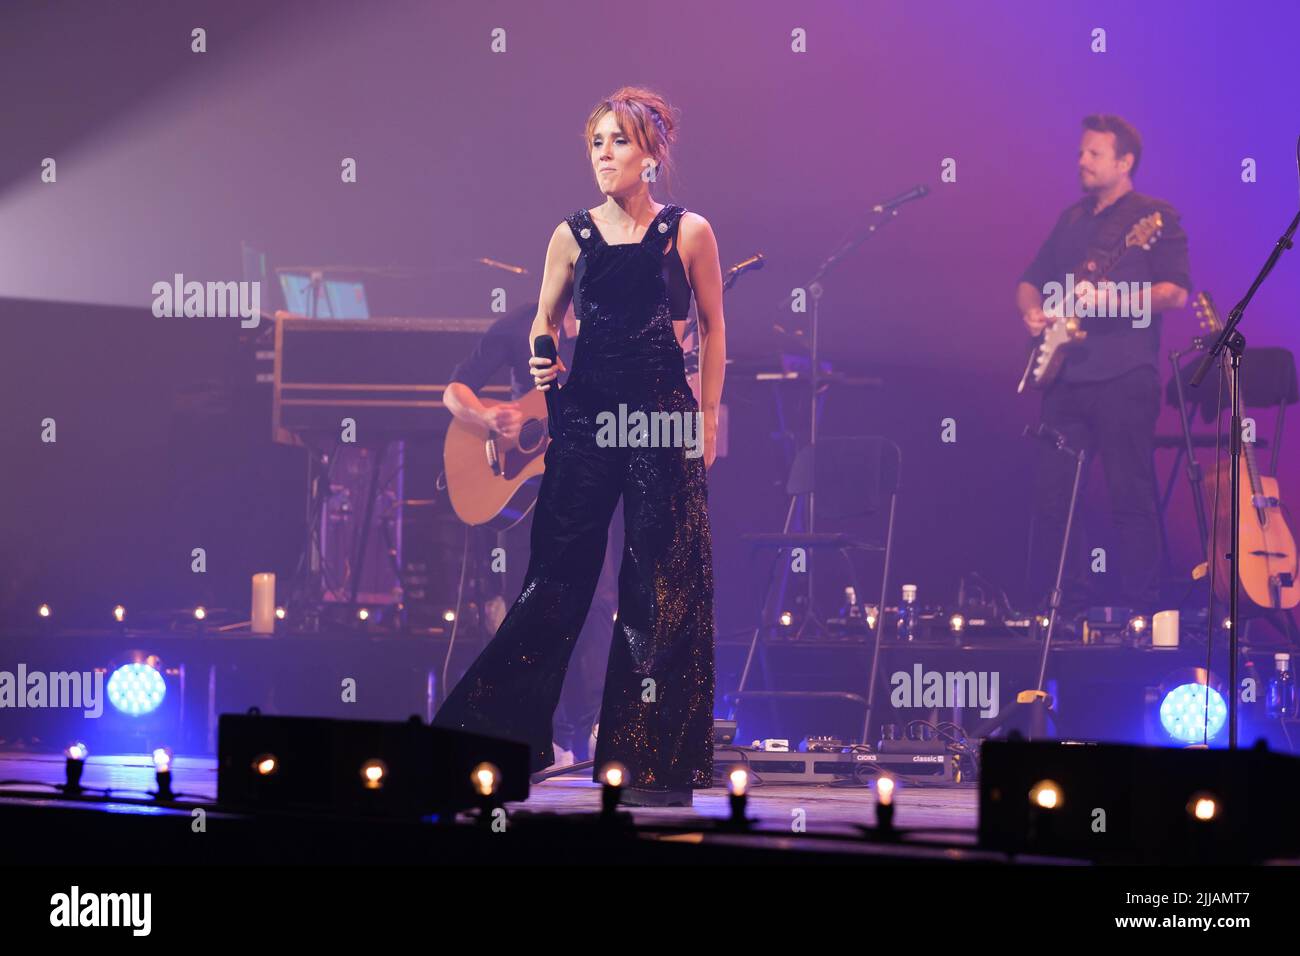 Madrid, Spain. 24th July, 2022. The French singer-songwriter Isabelle Geffroy, known by her stage name Zaz, performs during the concert at the Teatro Real in Madrid where she has shown her fusion of French song with gypsy jazz, within the tour 'Organique Tour' in Madrid. Credit: SOPA Images Limited/Alamy Live News Stock Photo